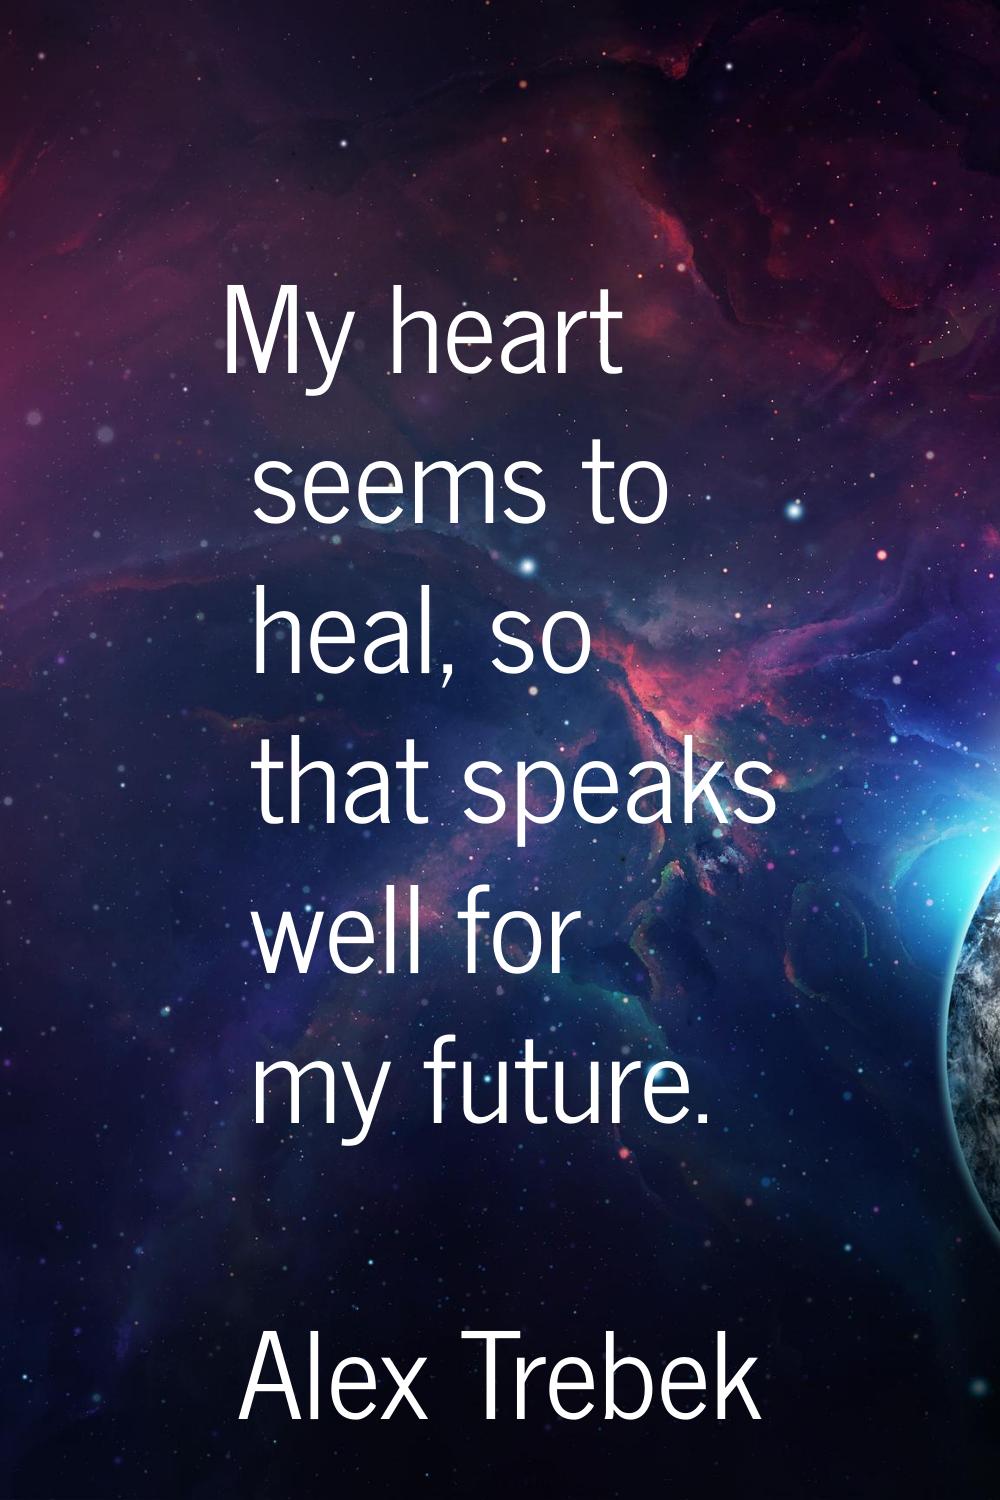 My heart seems to heal, so that speaks well for my future.